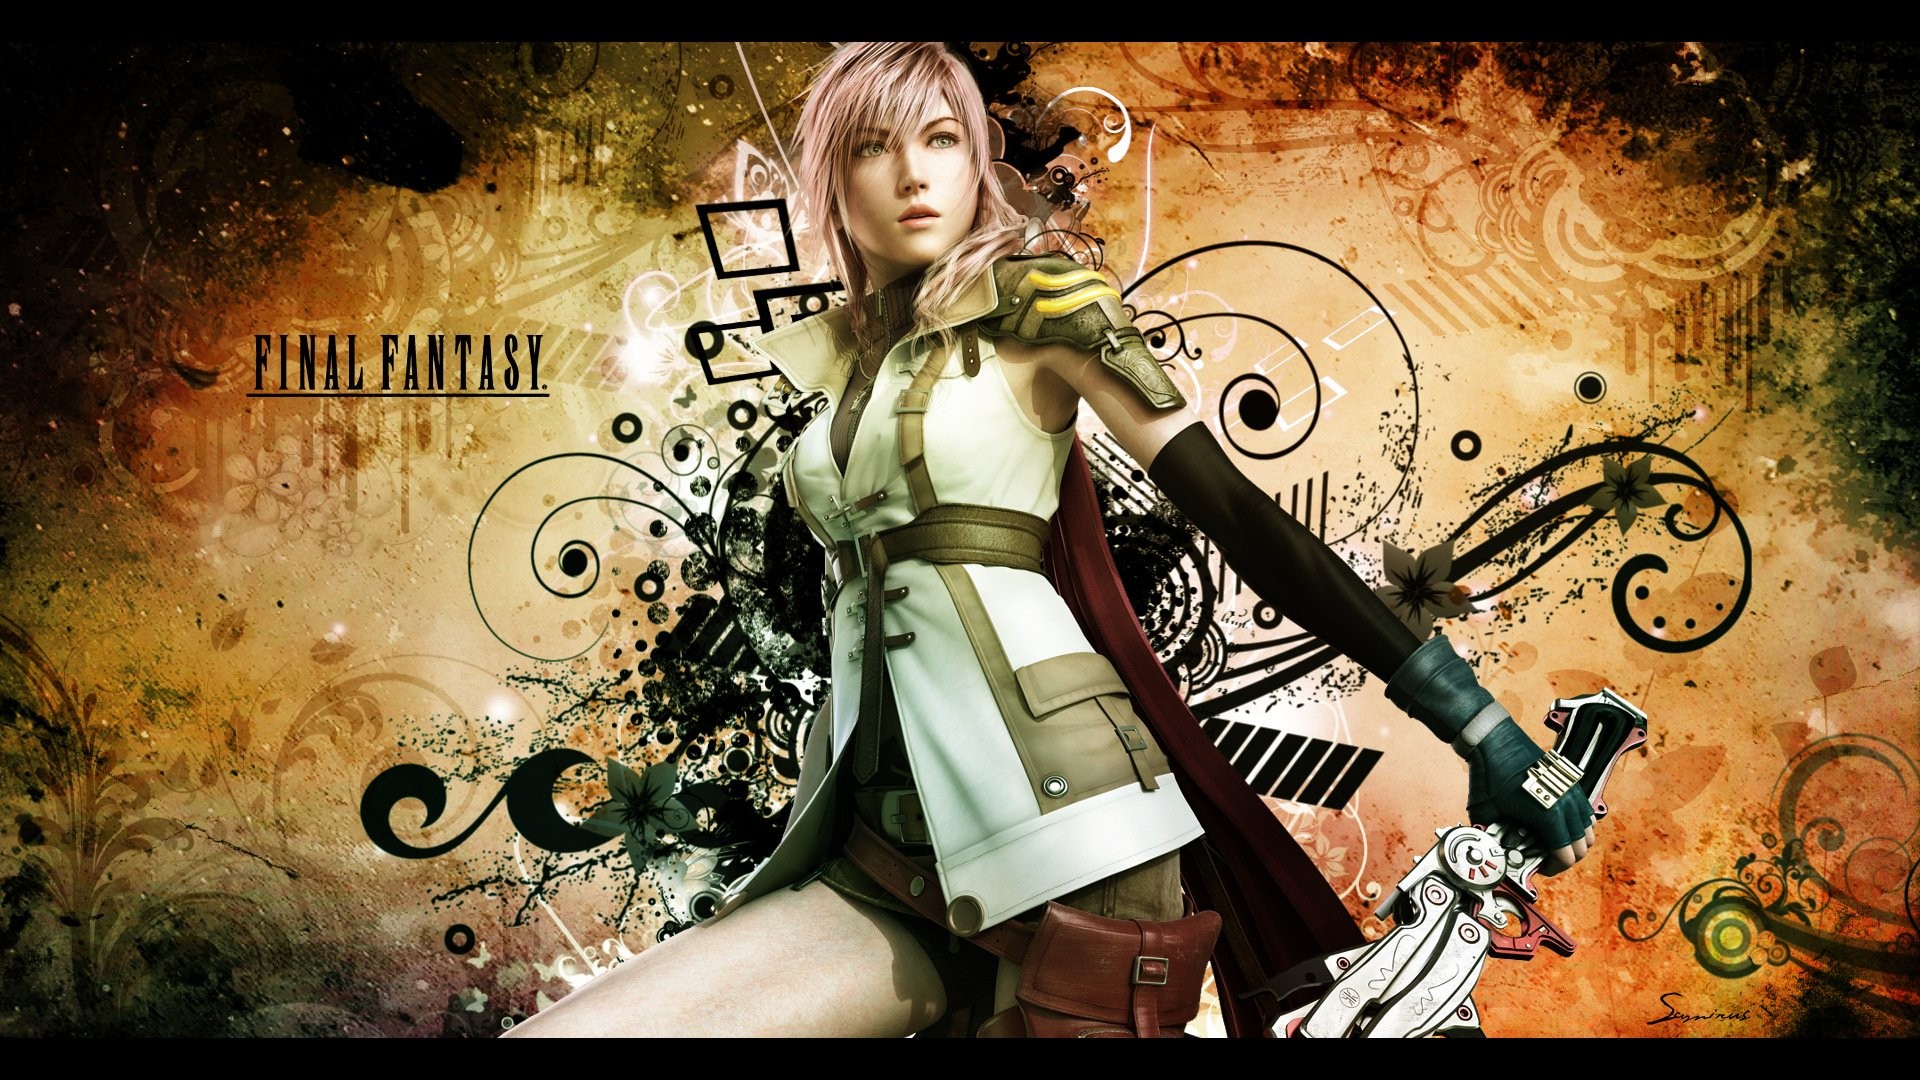 General 1920x1080 Final Fantasy Claire Farron video games video game art video game girls